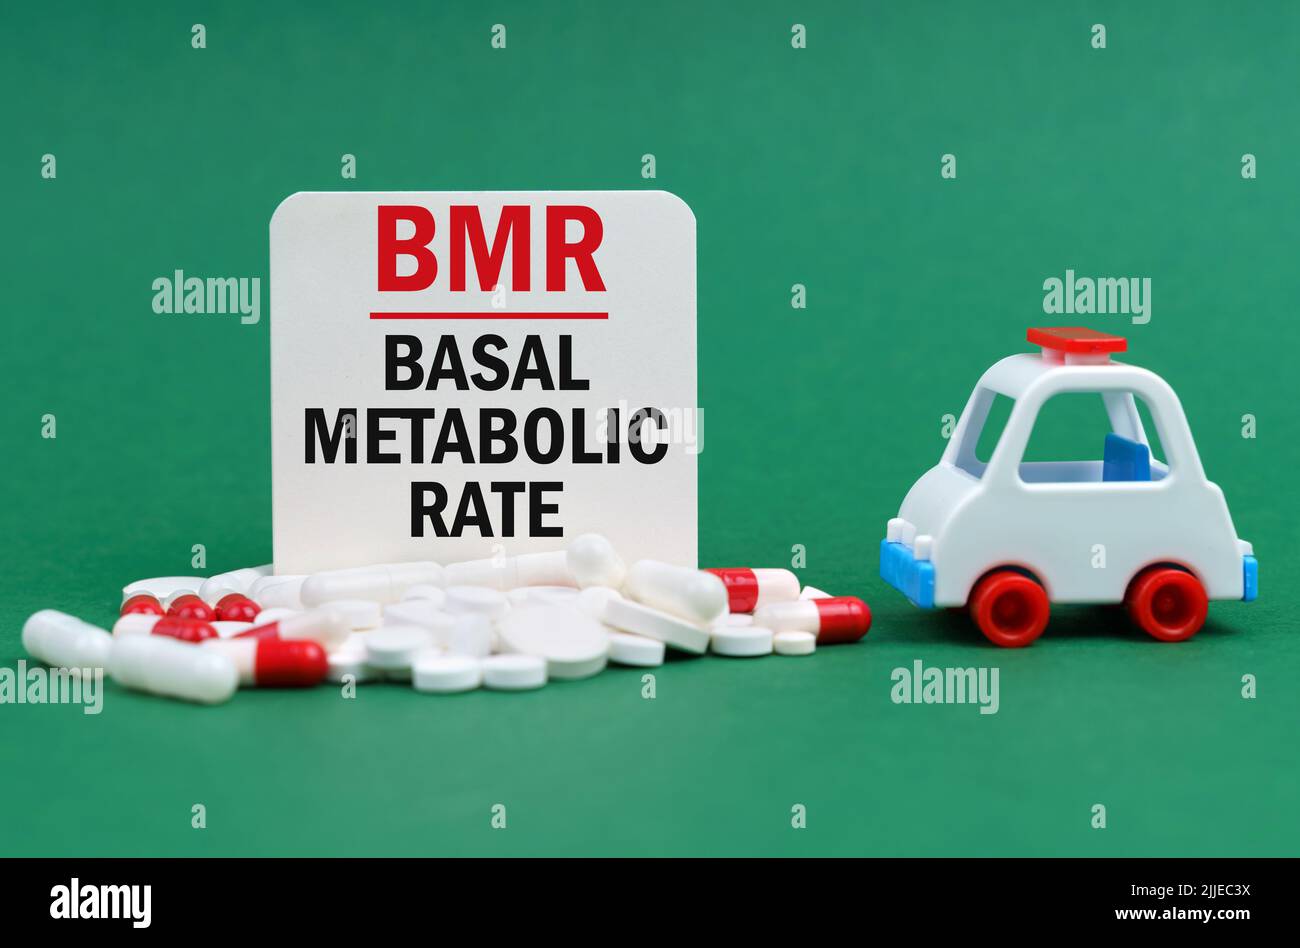 Clinical Metabolism : The Basal Metabolic Rate in Exophthalmic